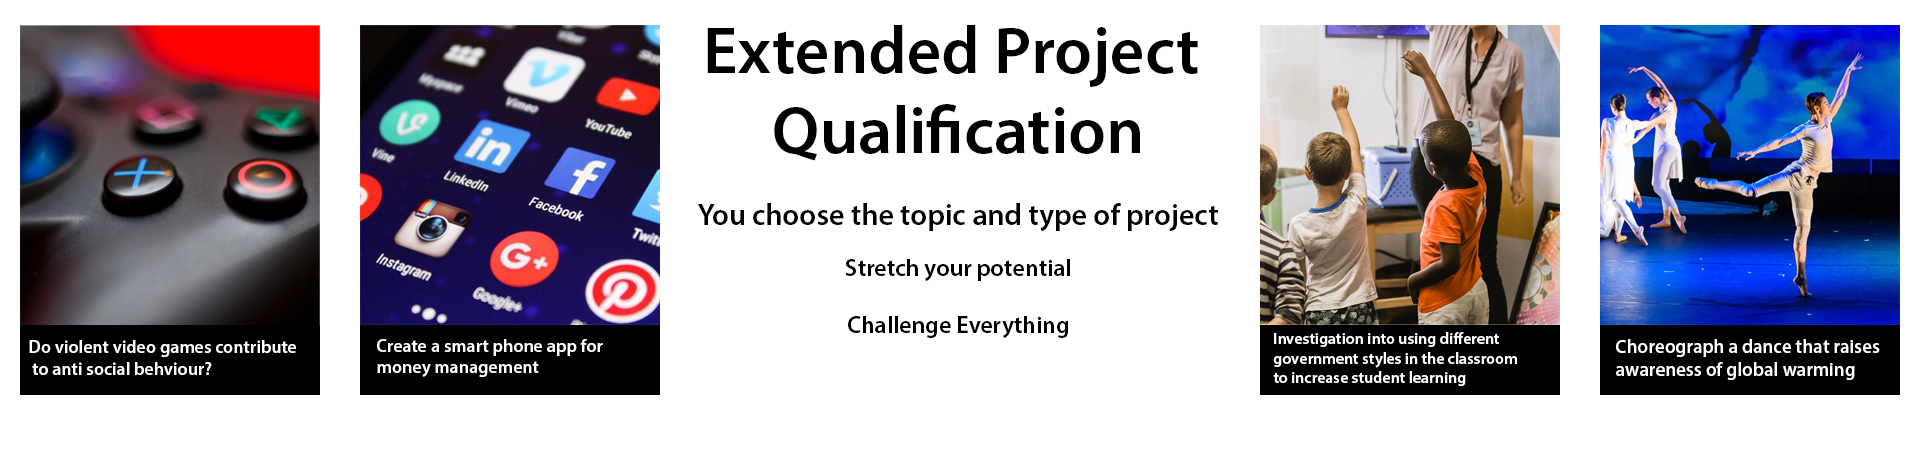 Extended Project Qualification